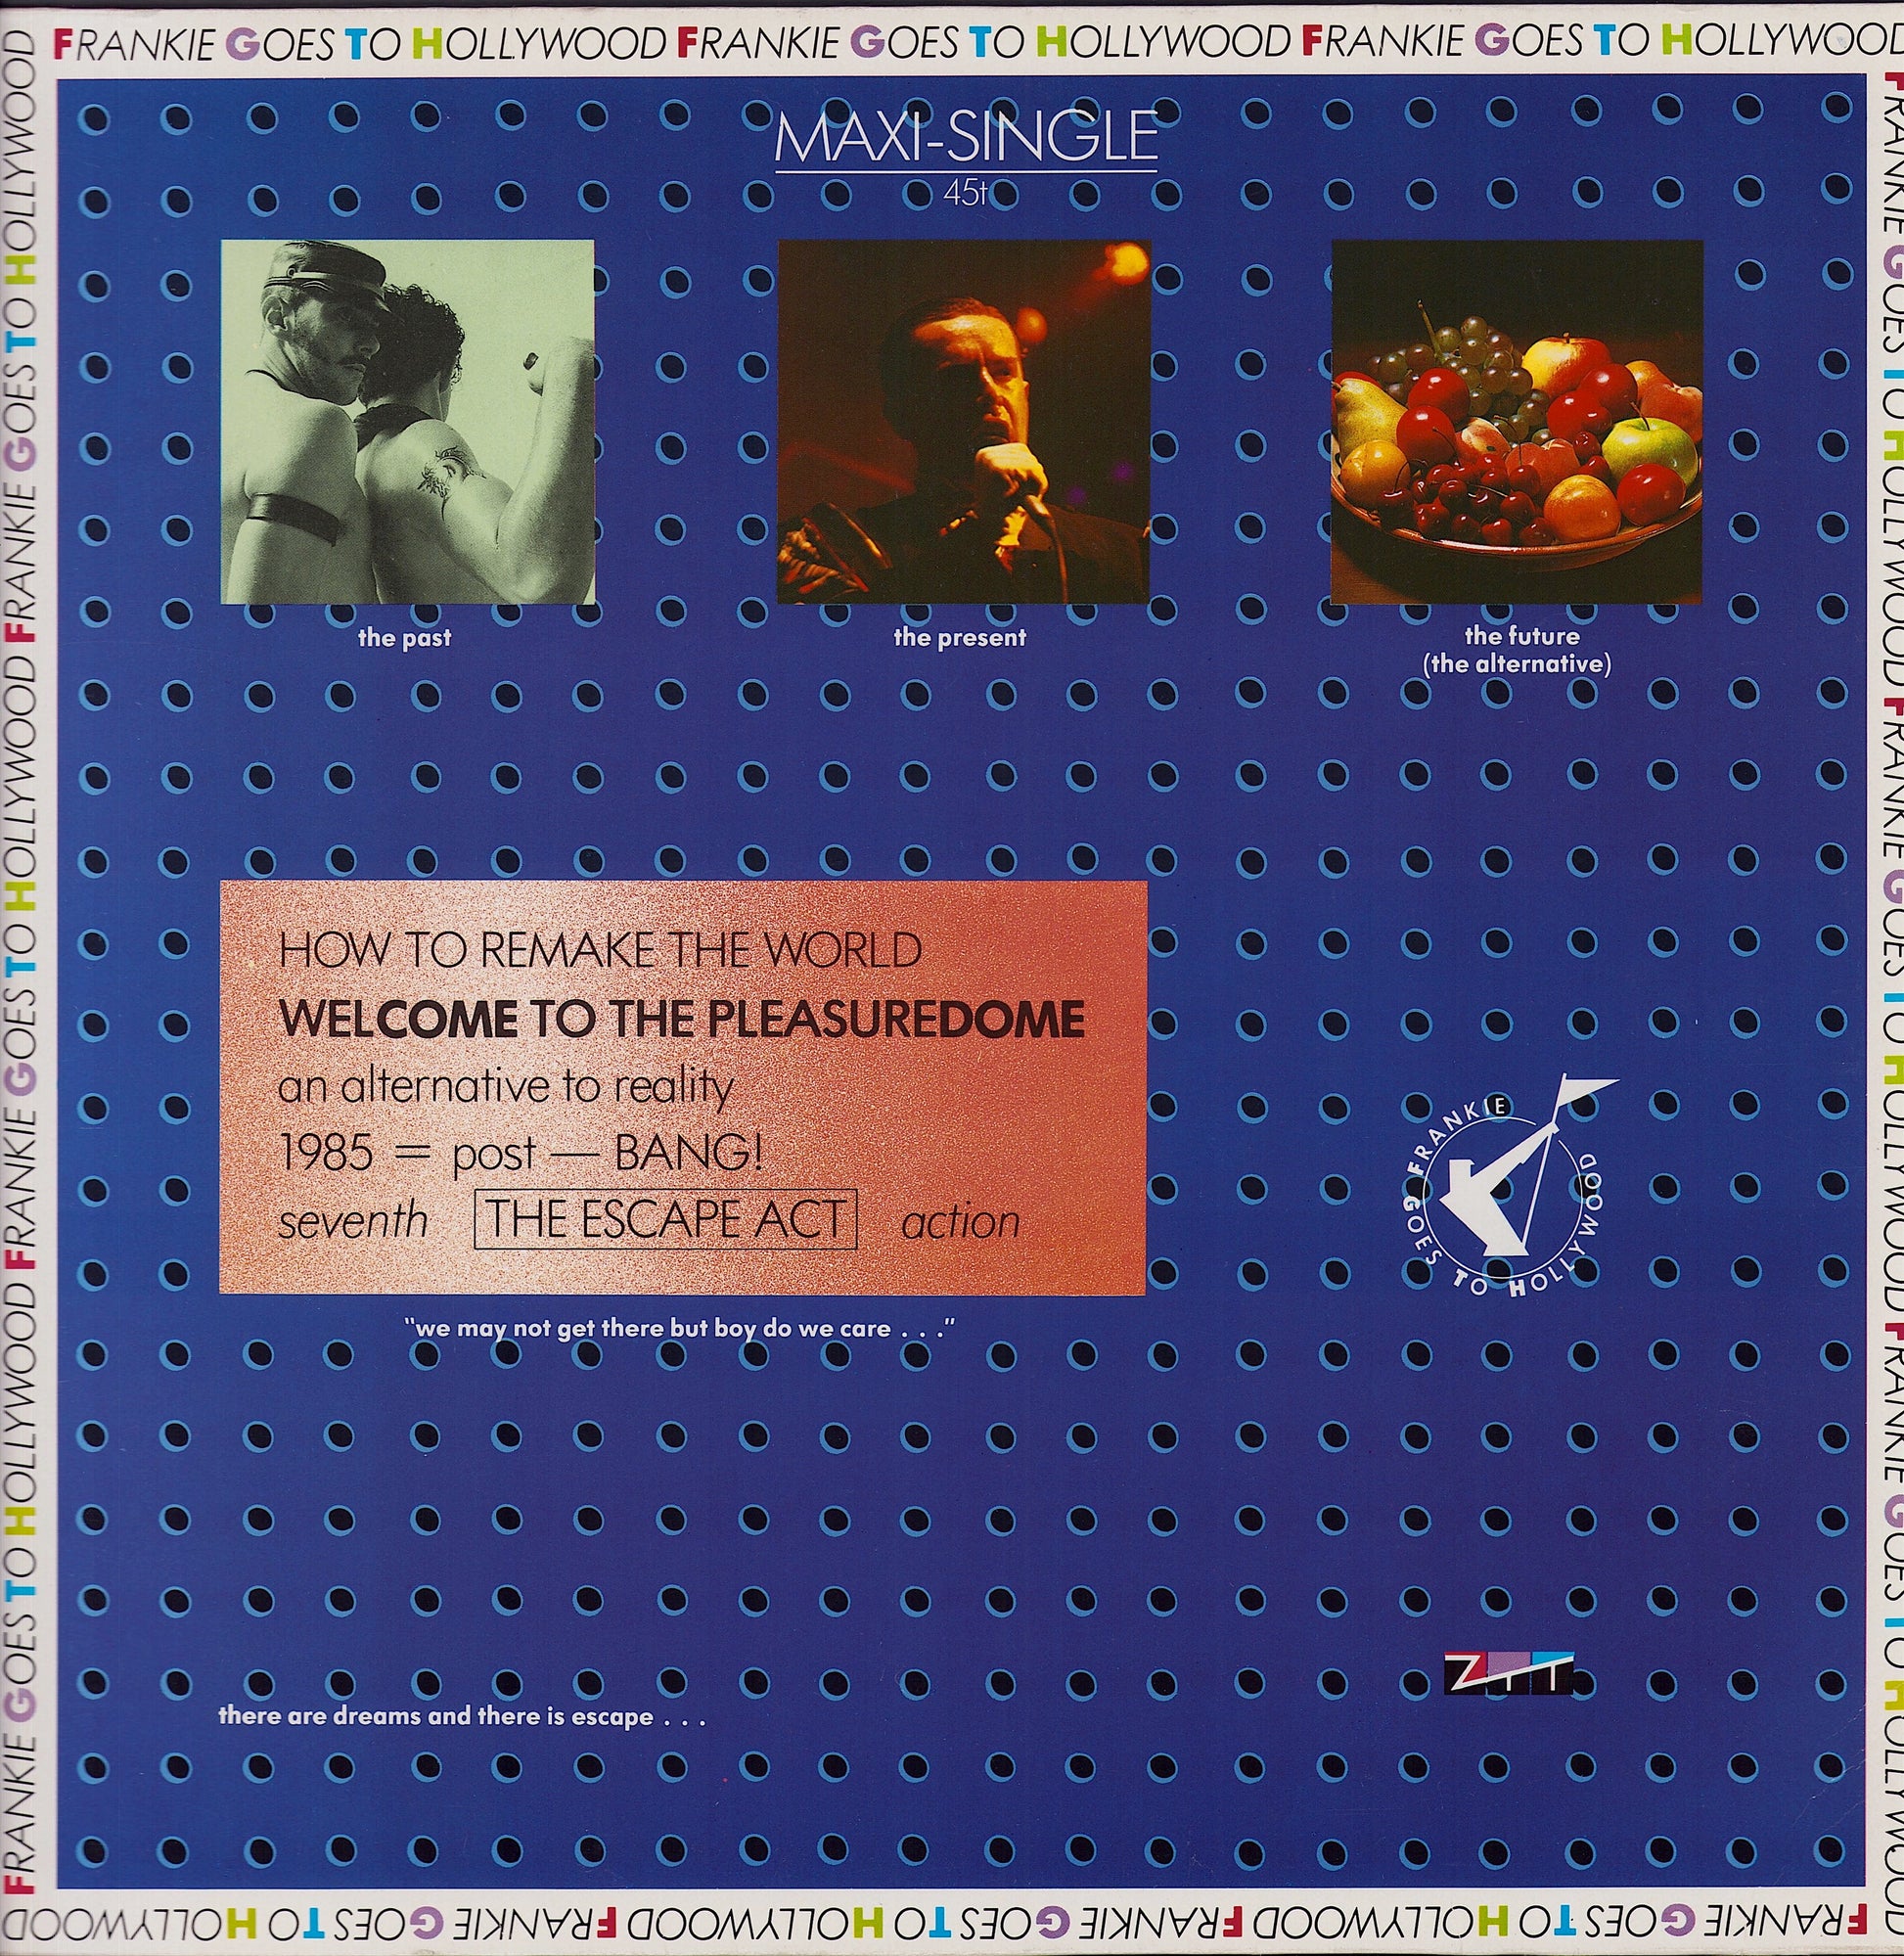 Frankie Goes To Hollywood ‎- Welcome To The Pleasuredome Vinyl 12"